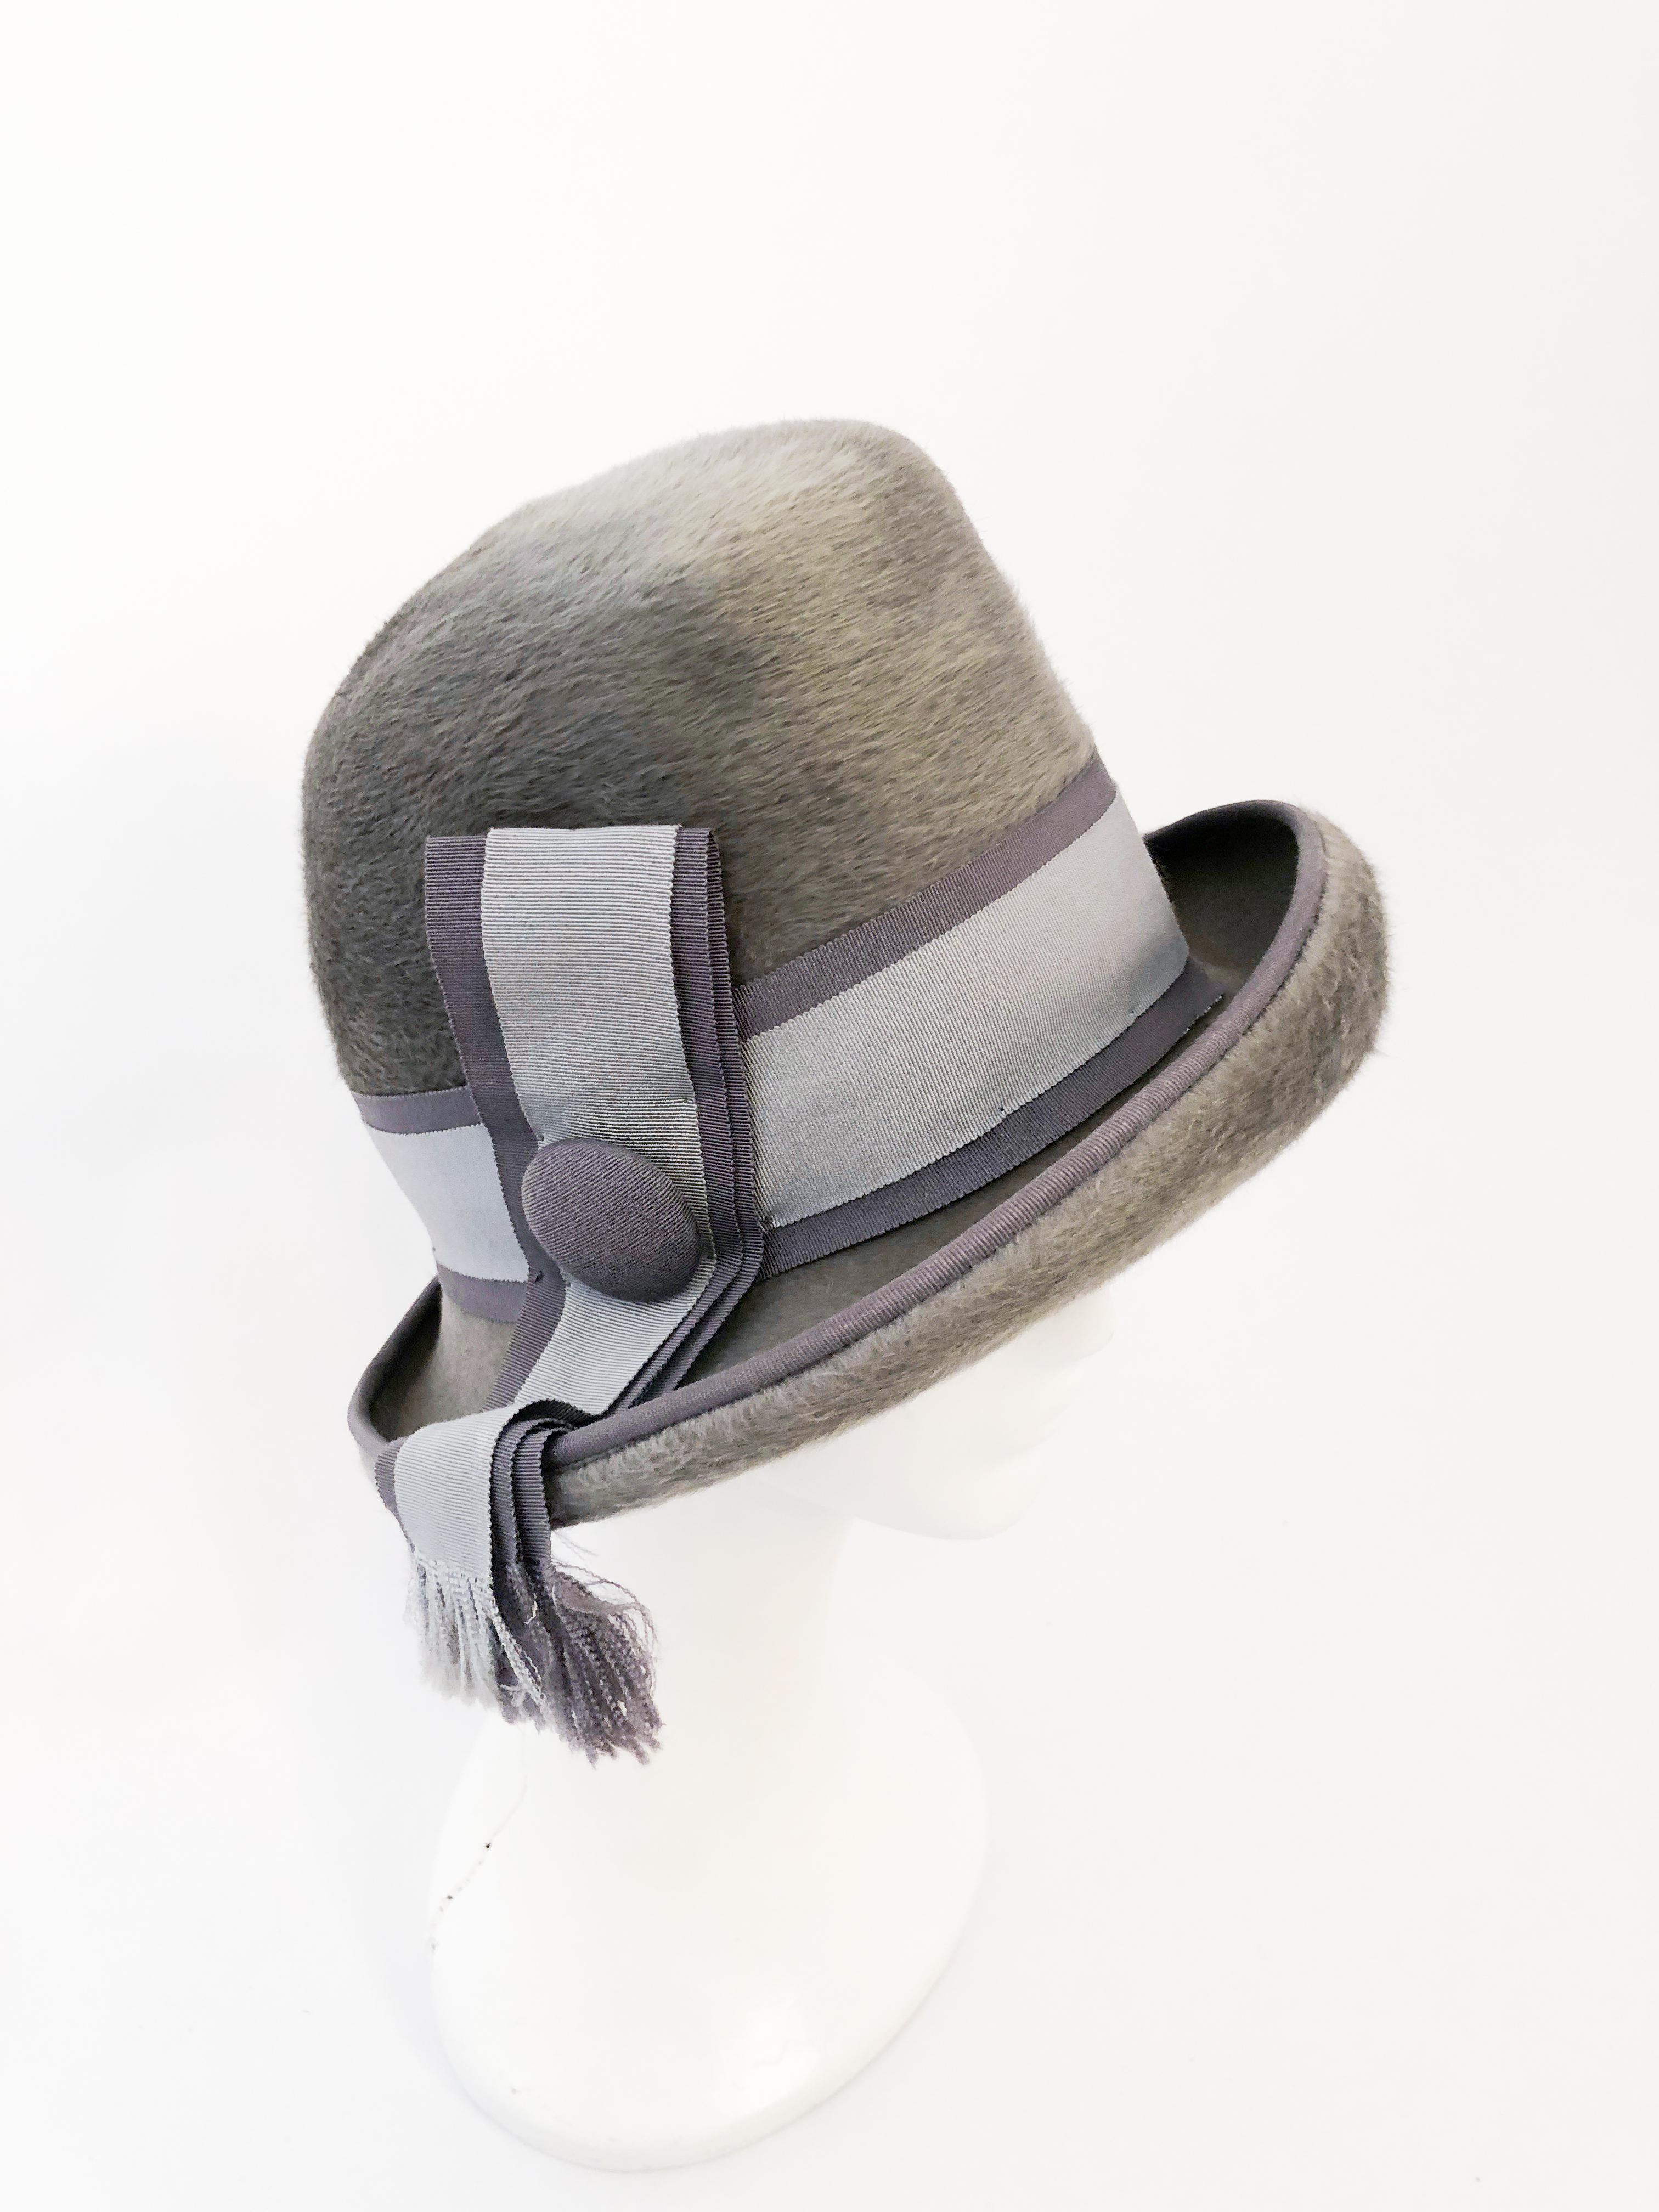 1960s I. Magnin Grey Beaver Felt Cloche. Grey beaver felt hat with two-toned gros-grain band with covered button accent. 